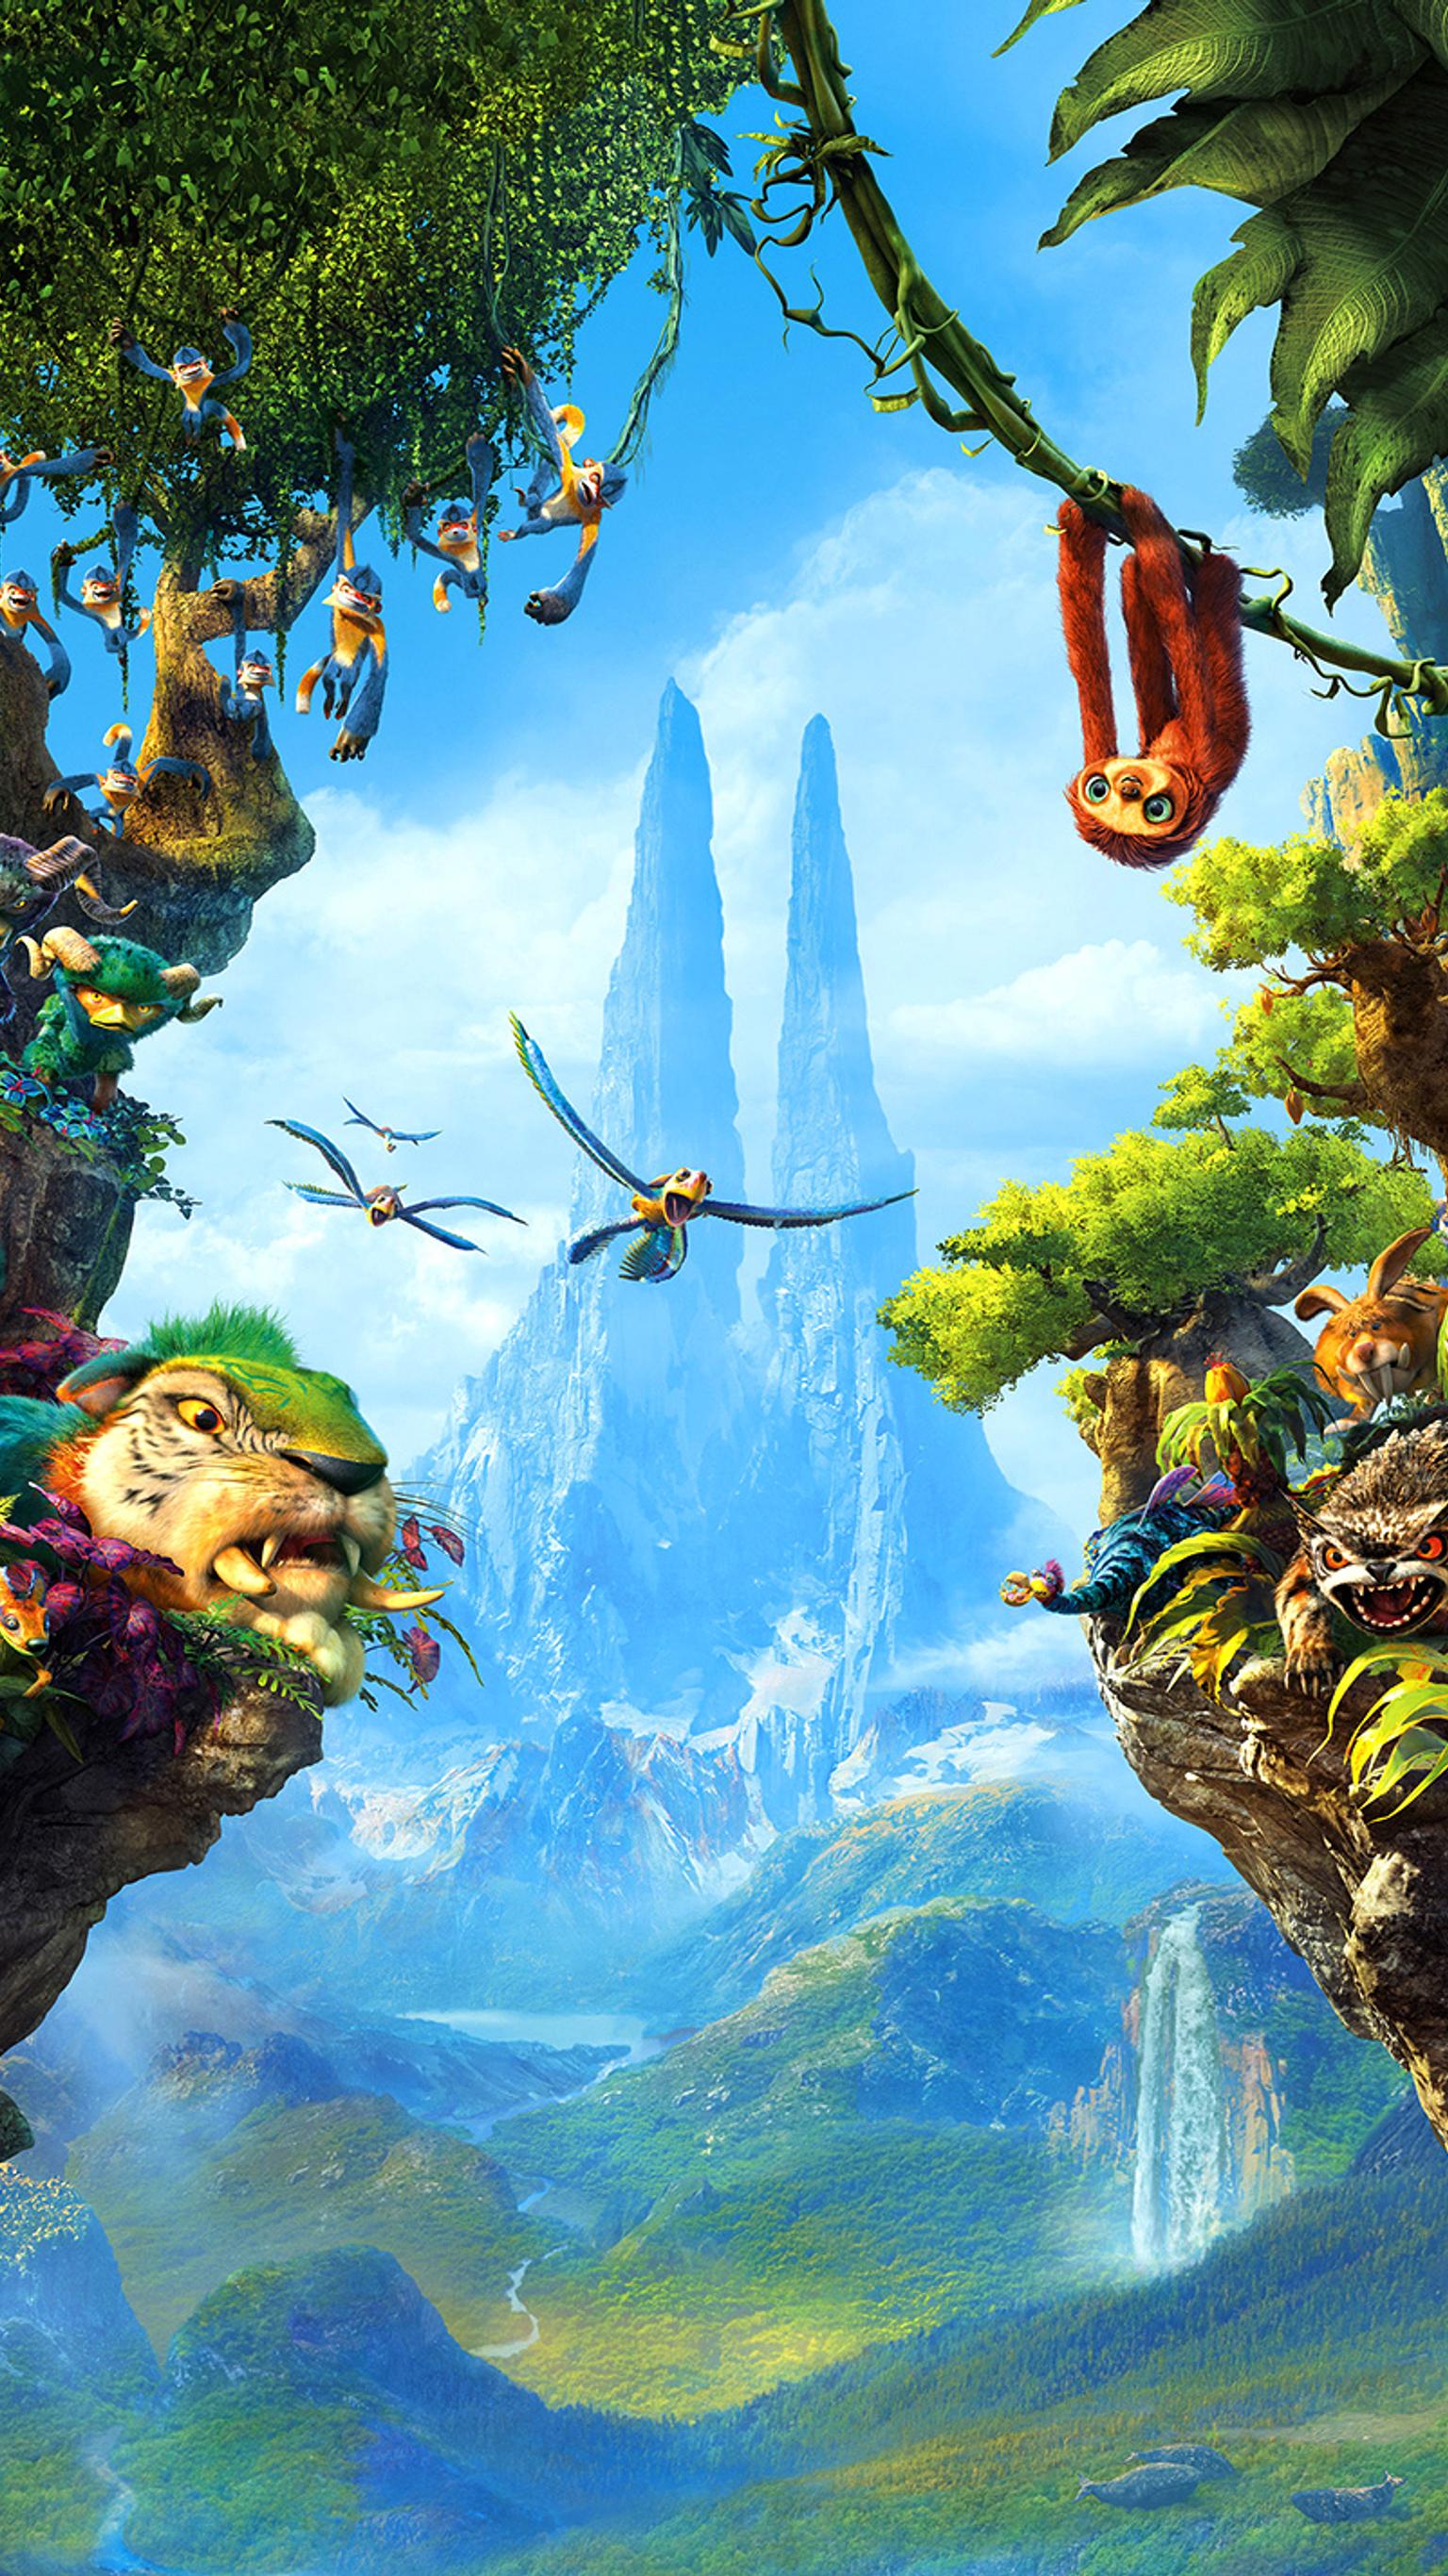 The Croods A New Age 2020 Wallpapers